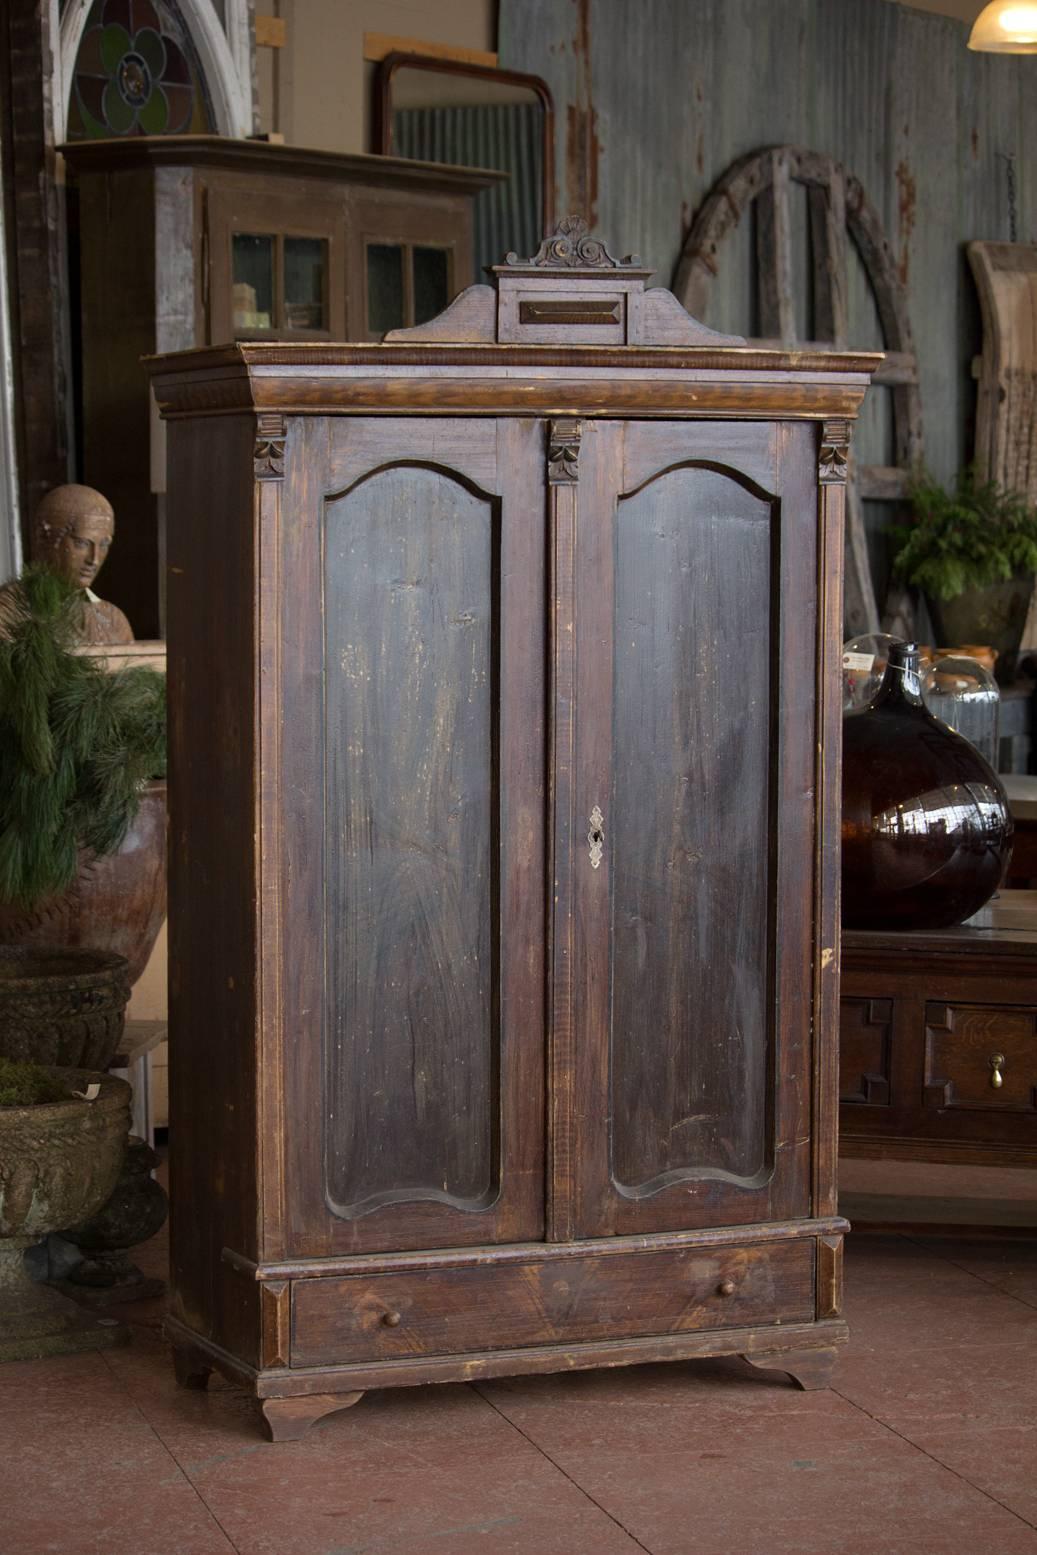 Antique petite original painted armoire with shelves. Great storage for kitchen, bathroom, etc.